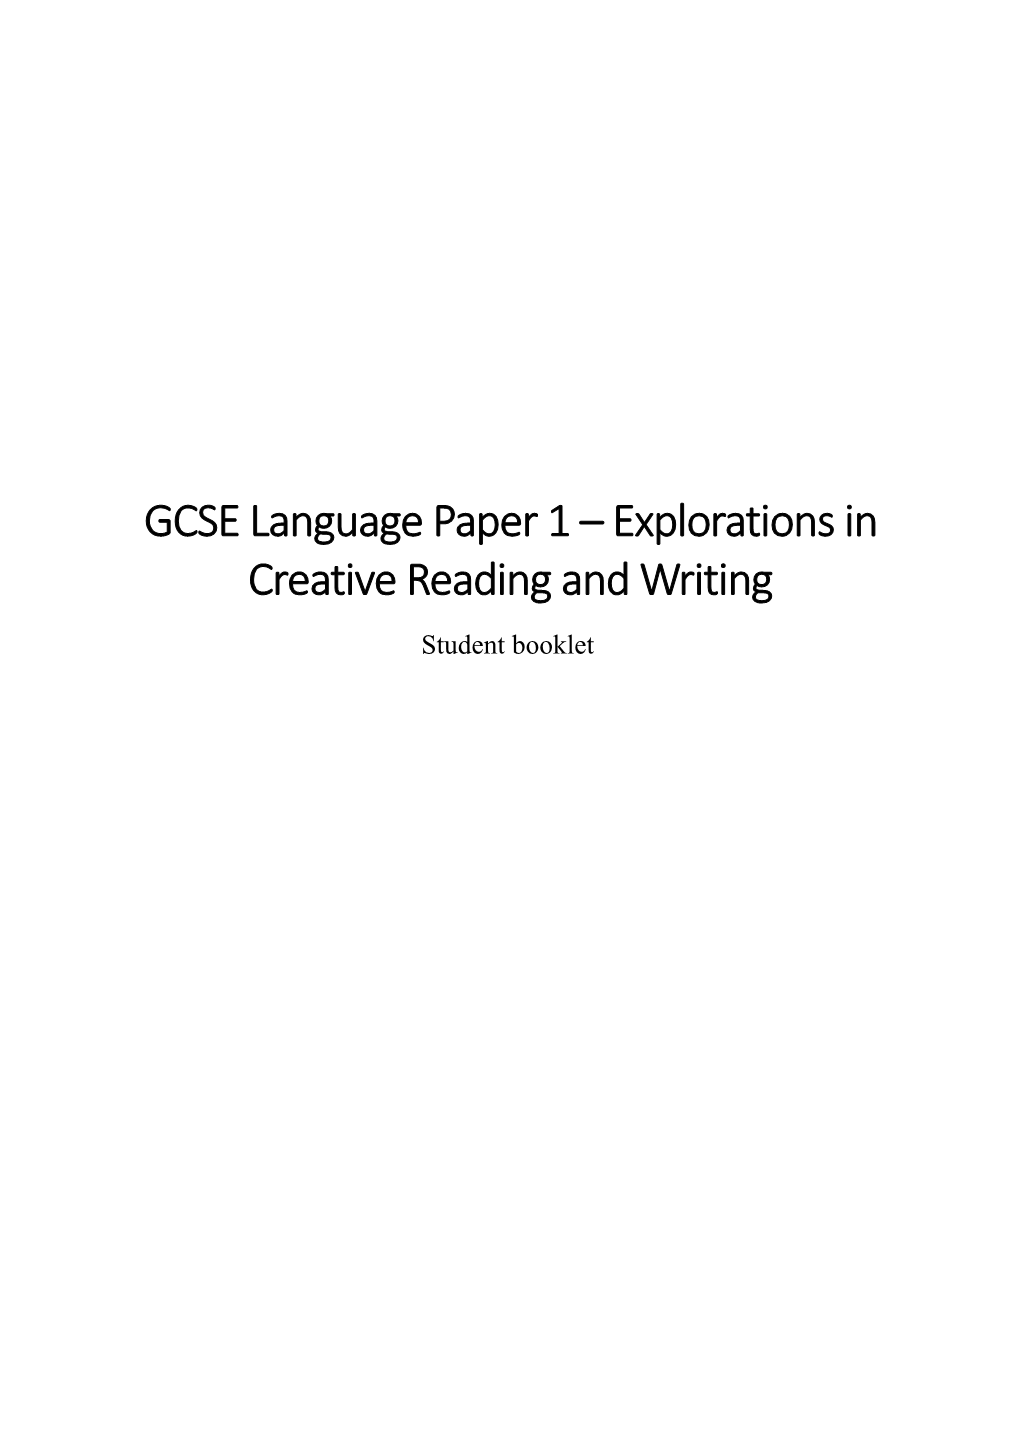 GCSE Language Paper 1 Explorations in Creative Reading and Writing